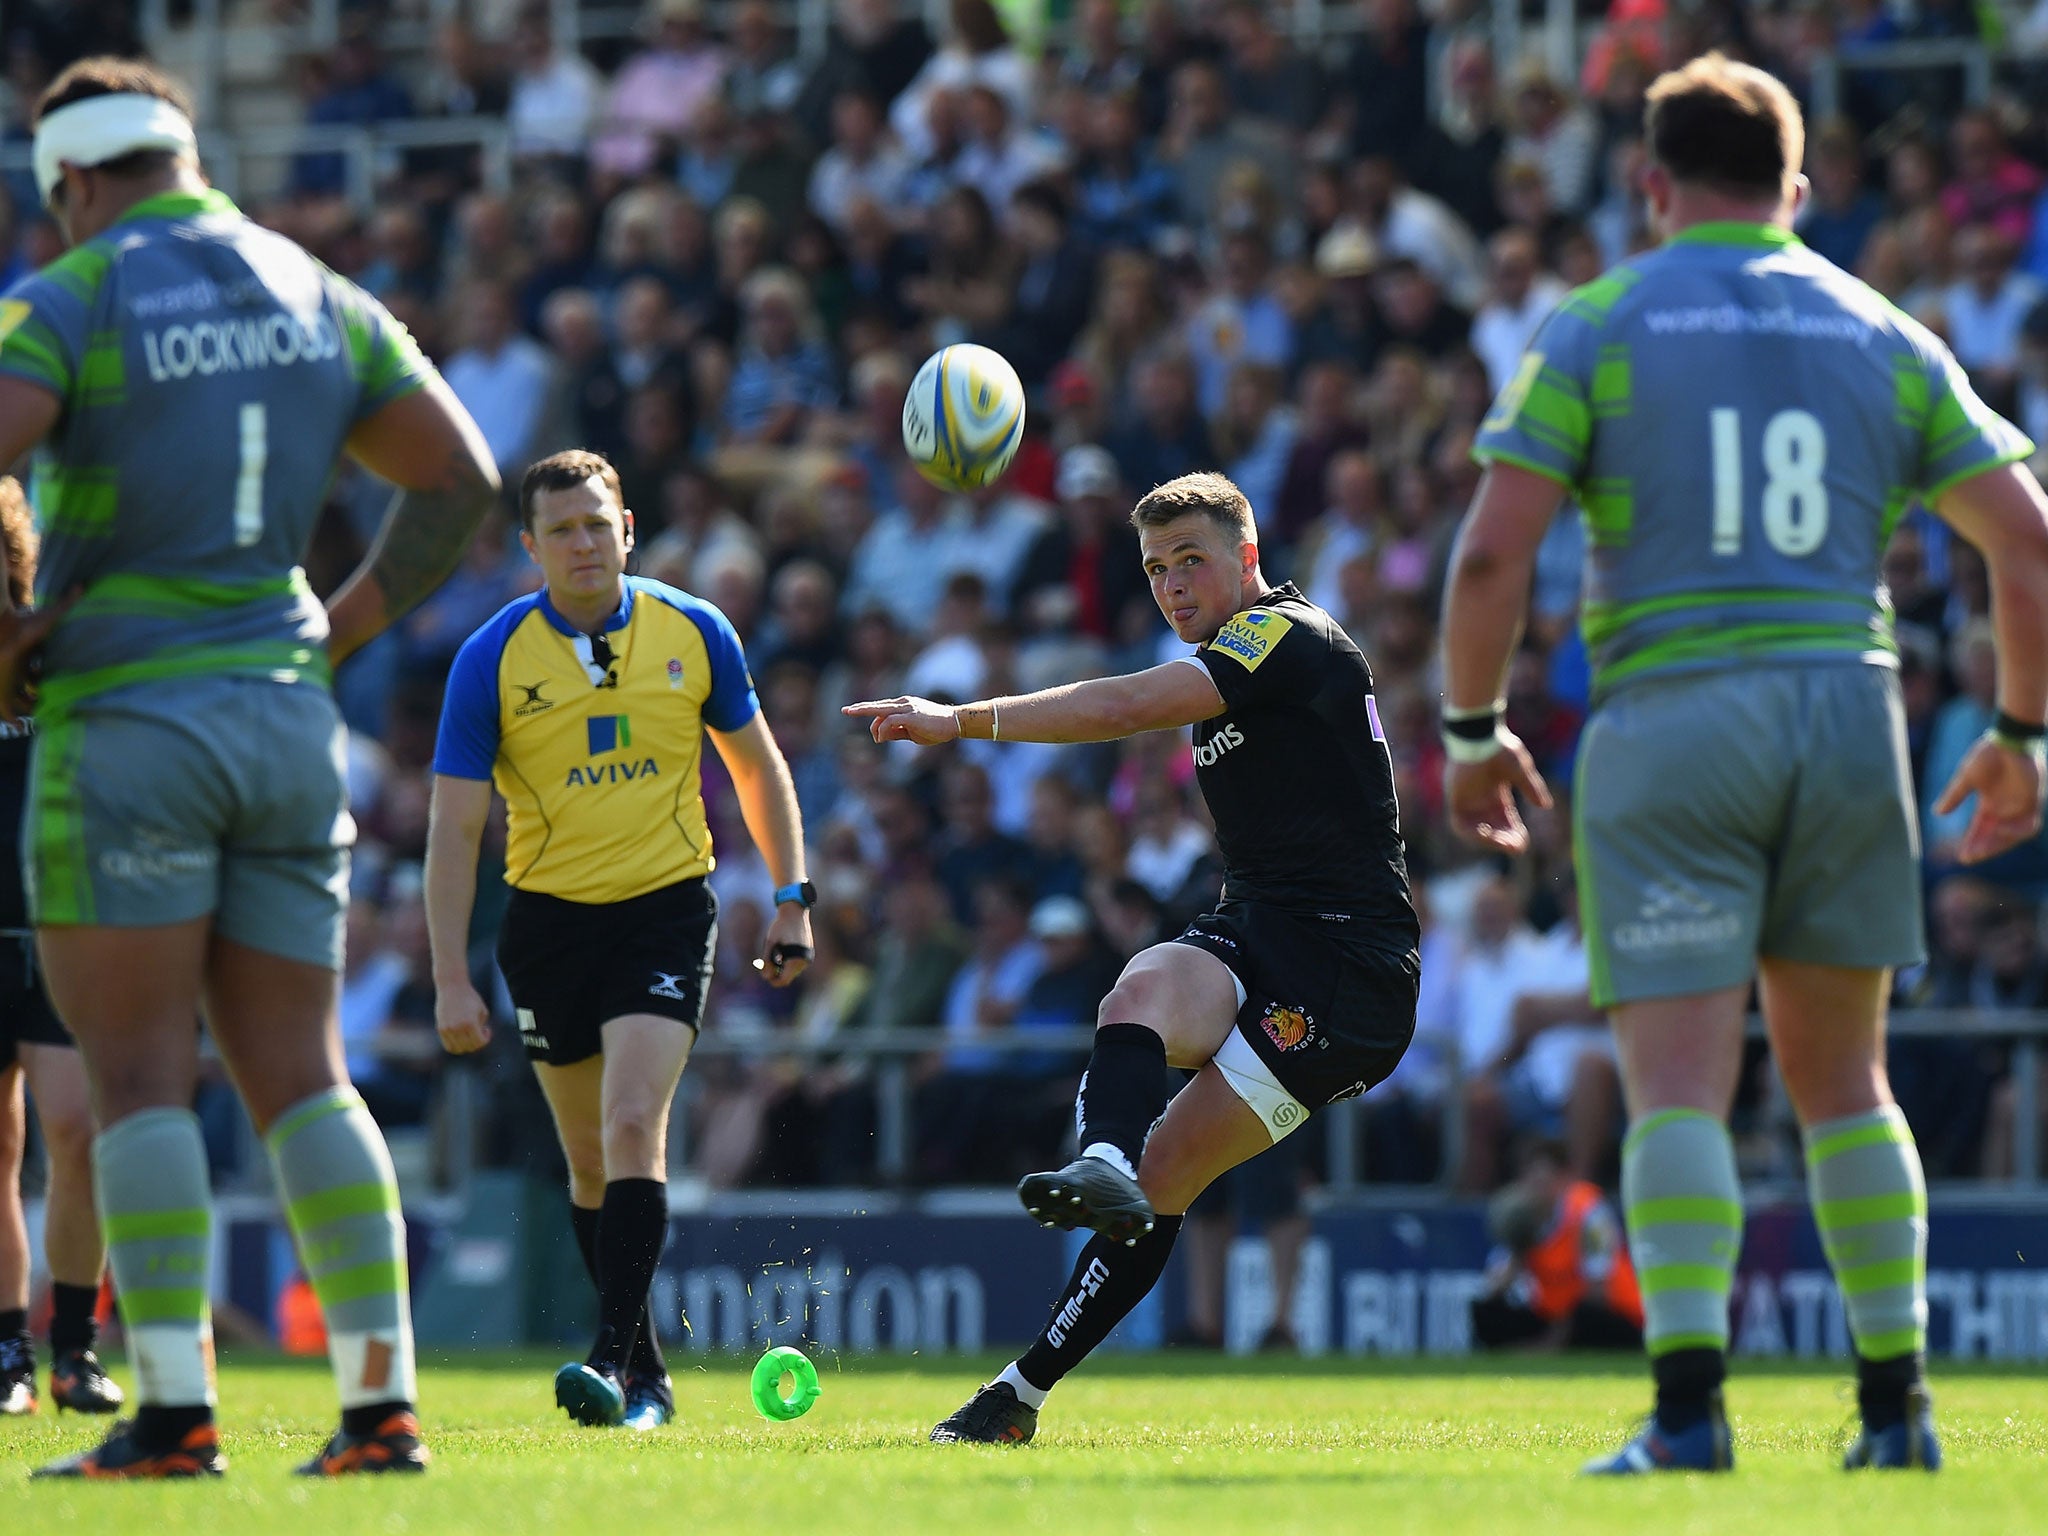 Joe Simmonds kicks a penalty for Exeter during Saturday’s semi-final